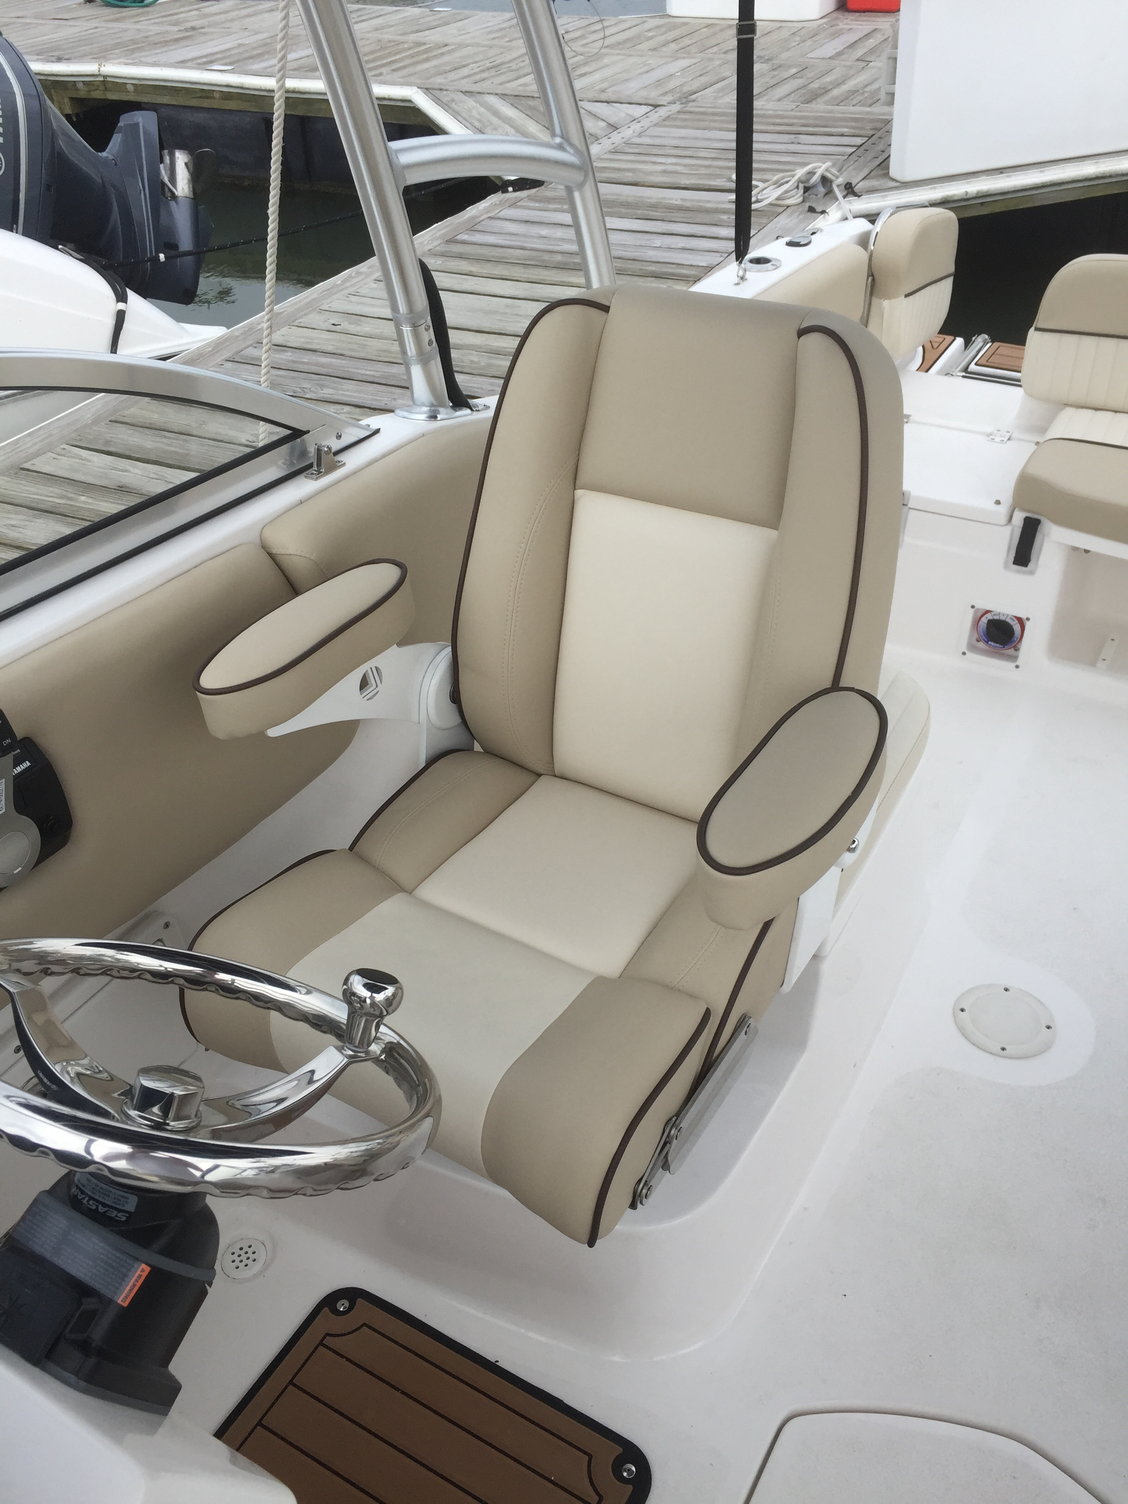 Captain's/Boat Chair Recommendation Pls. - The Hull Truth